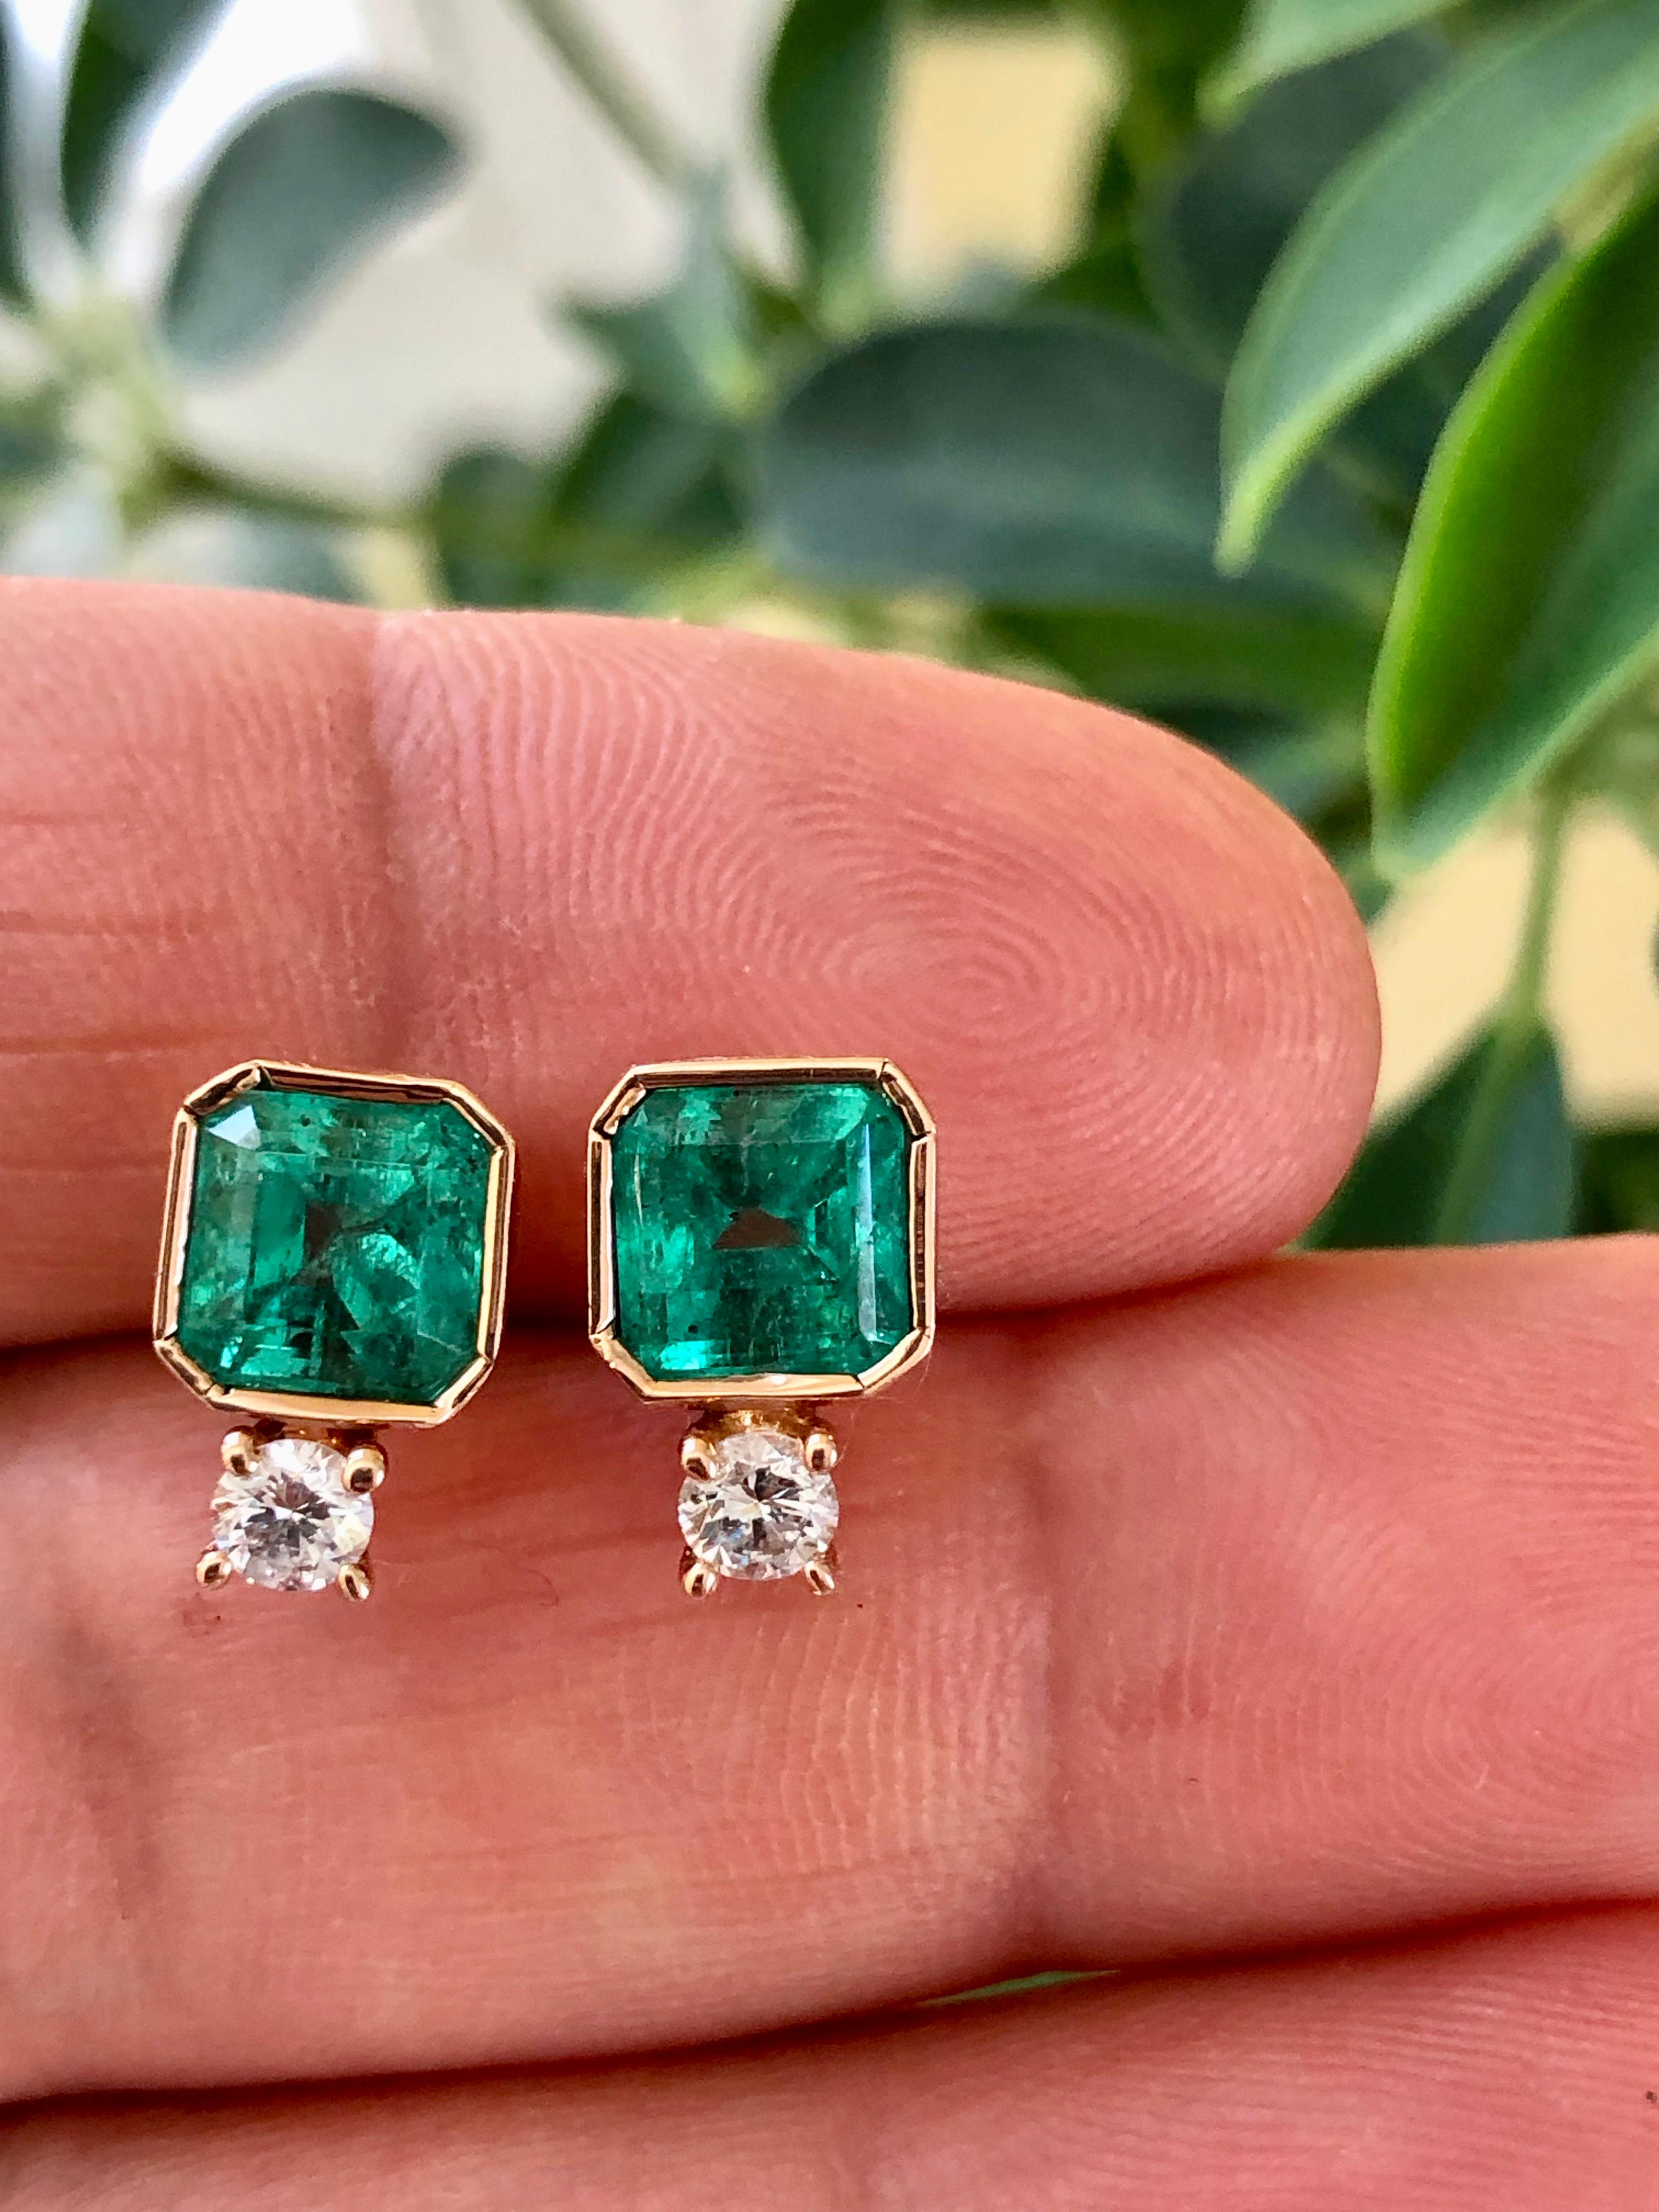 The earrings are sold out. **Made to order, don't hesitate to inquire! Estimated Production Time: 3-4 weeks**

Fine Square AAA Natural Colombian Emerald Medium Green/ Clarity VS Total Weight Approx 3.25 carats and Approx. 0.40cts Natural Diamond